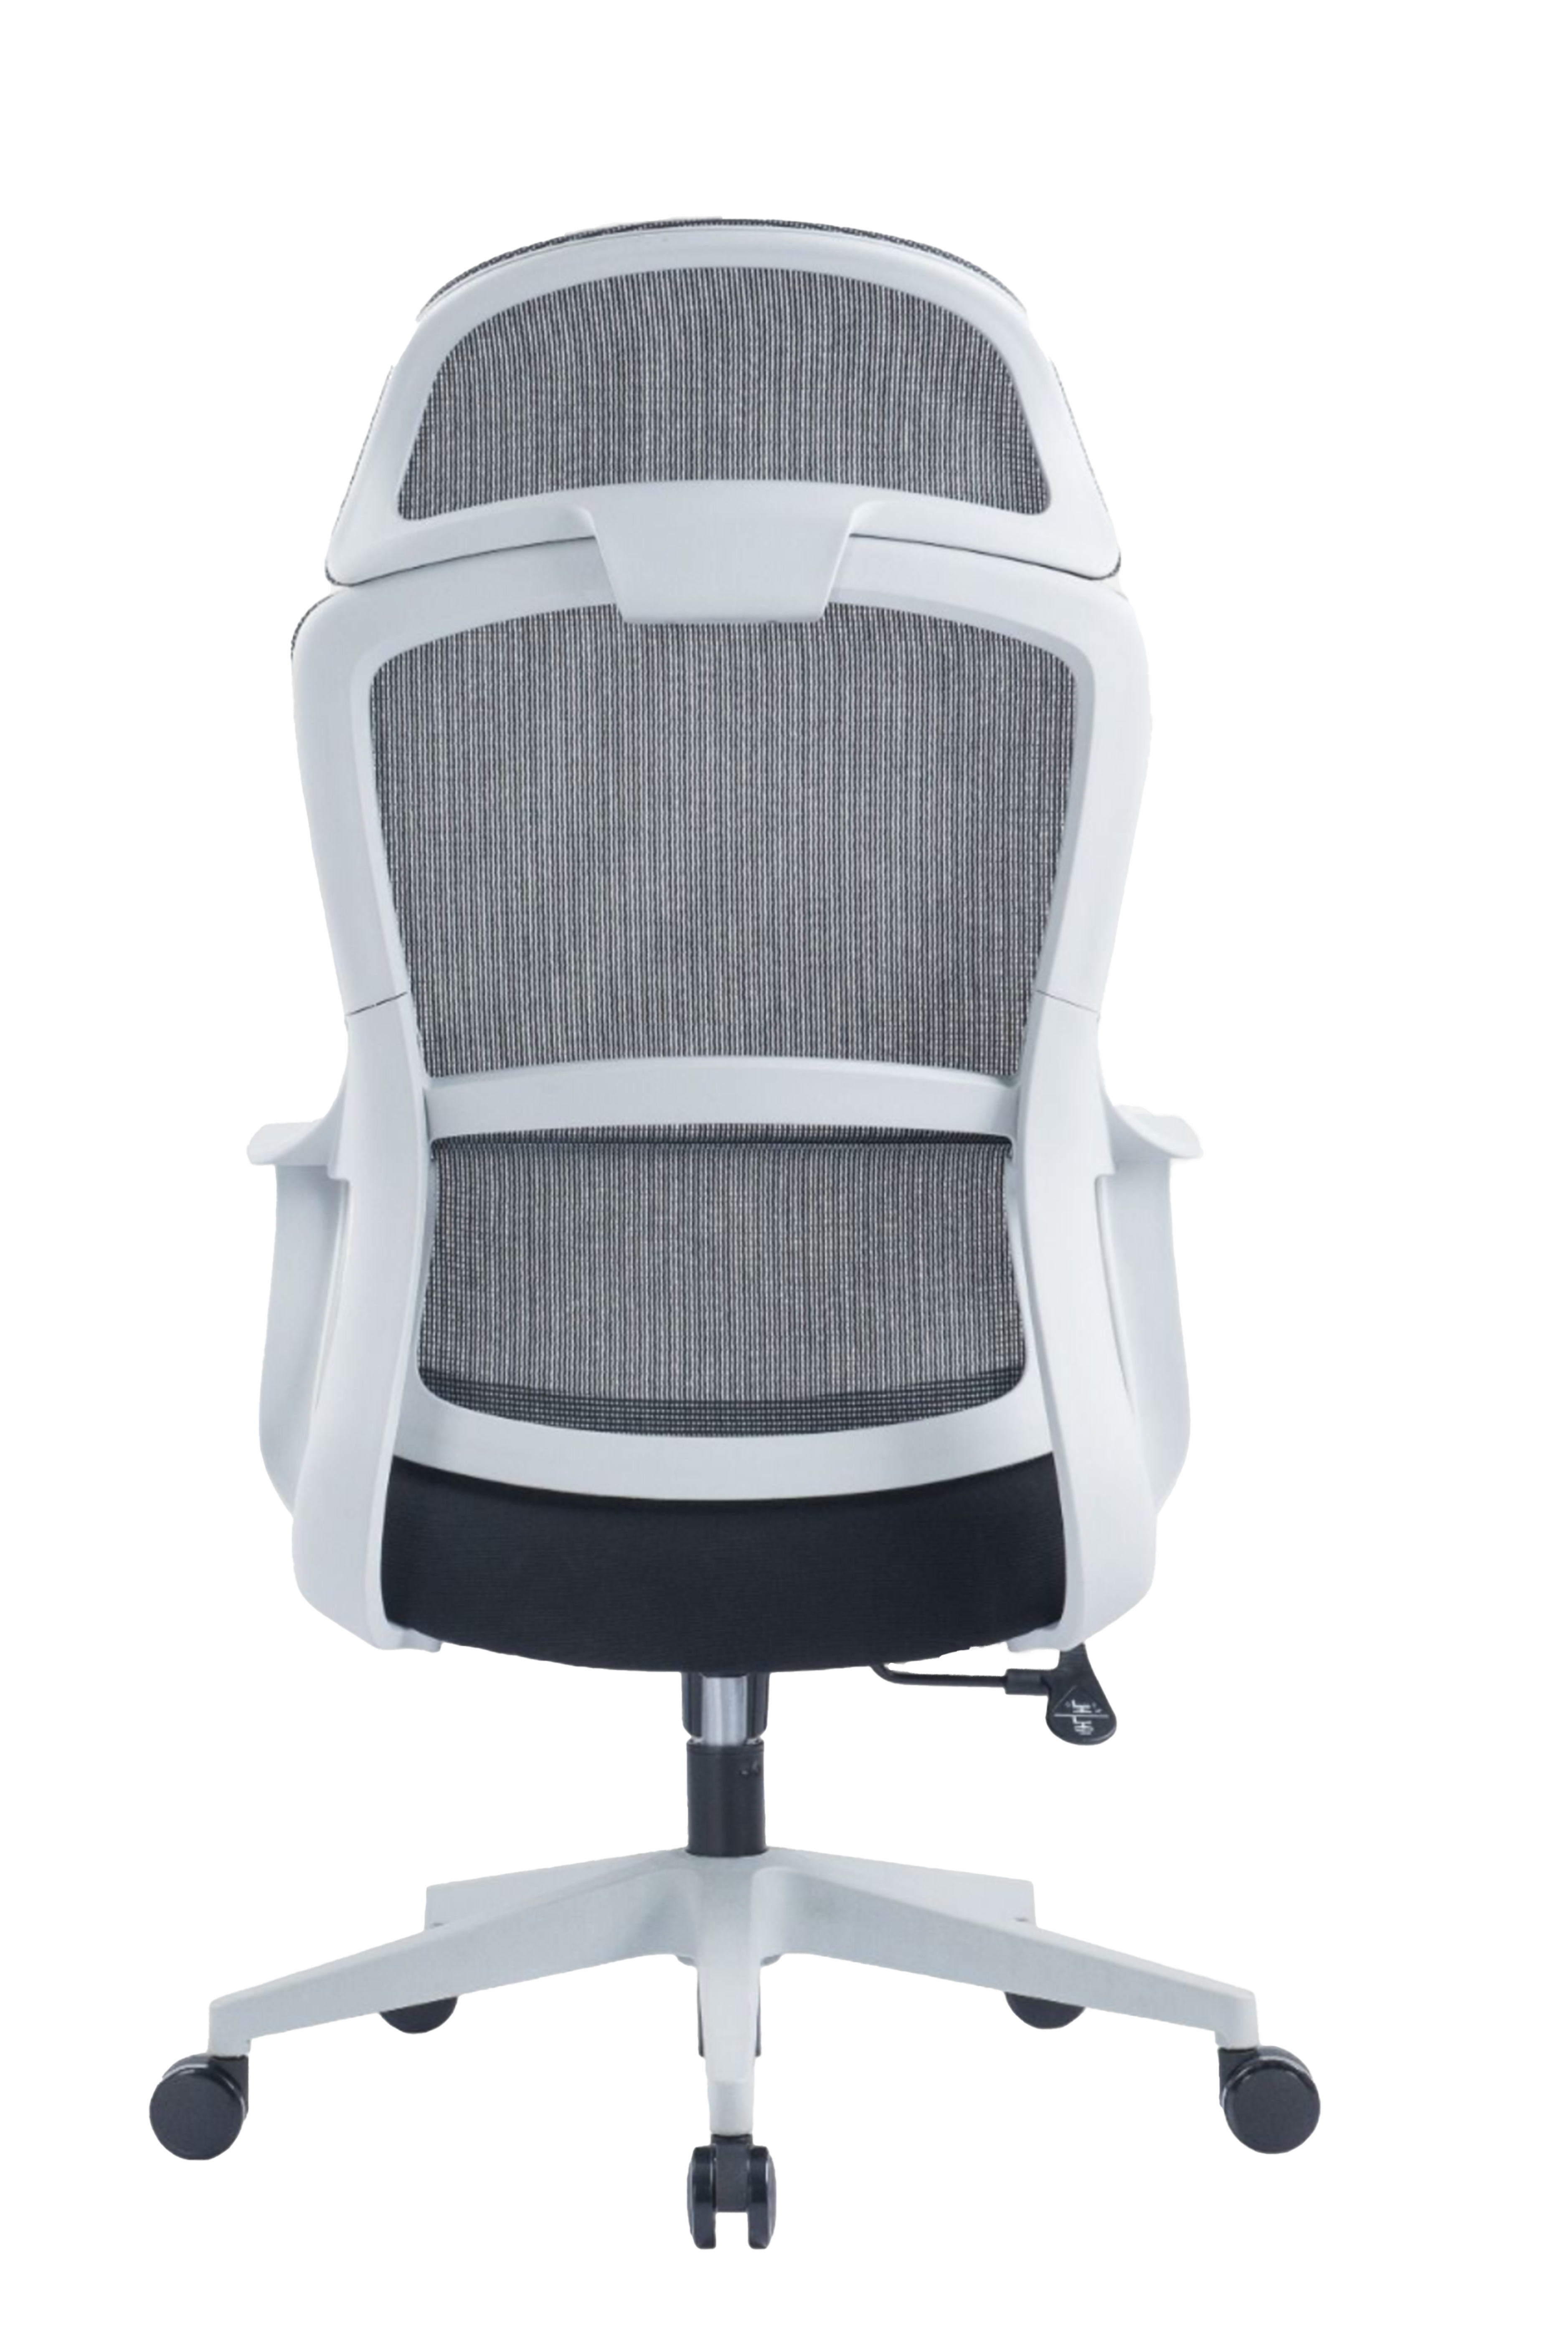 Leo High Back Ergonomic Office Chair With Cushion Seat And Nylon Base - Grey